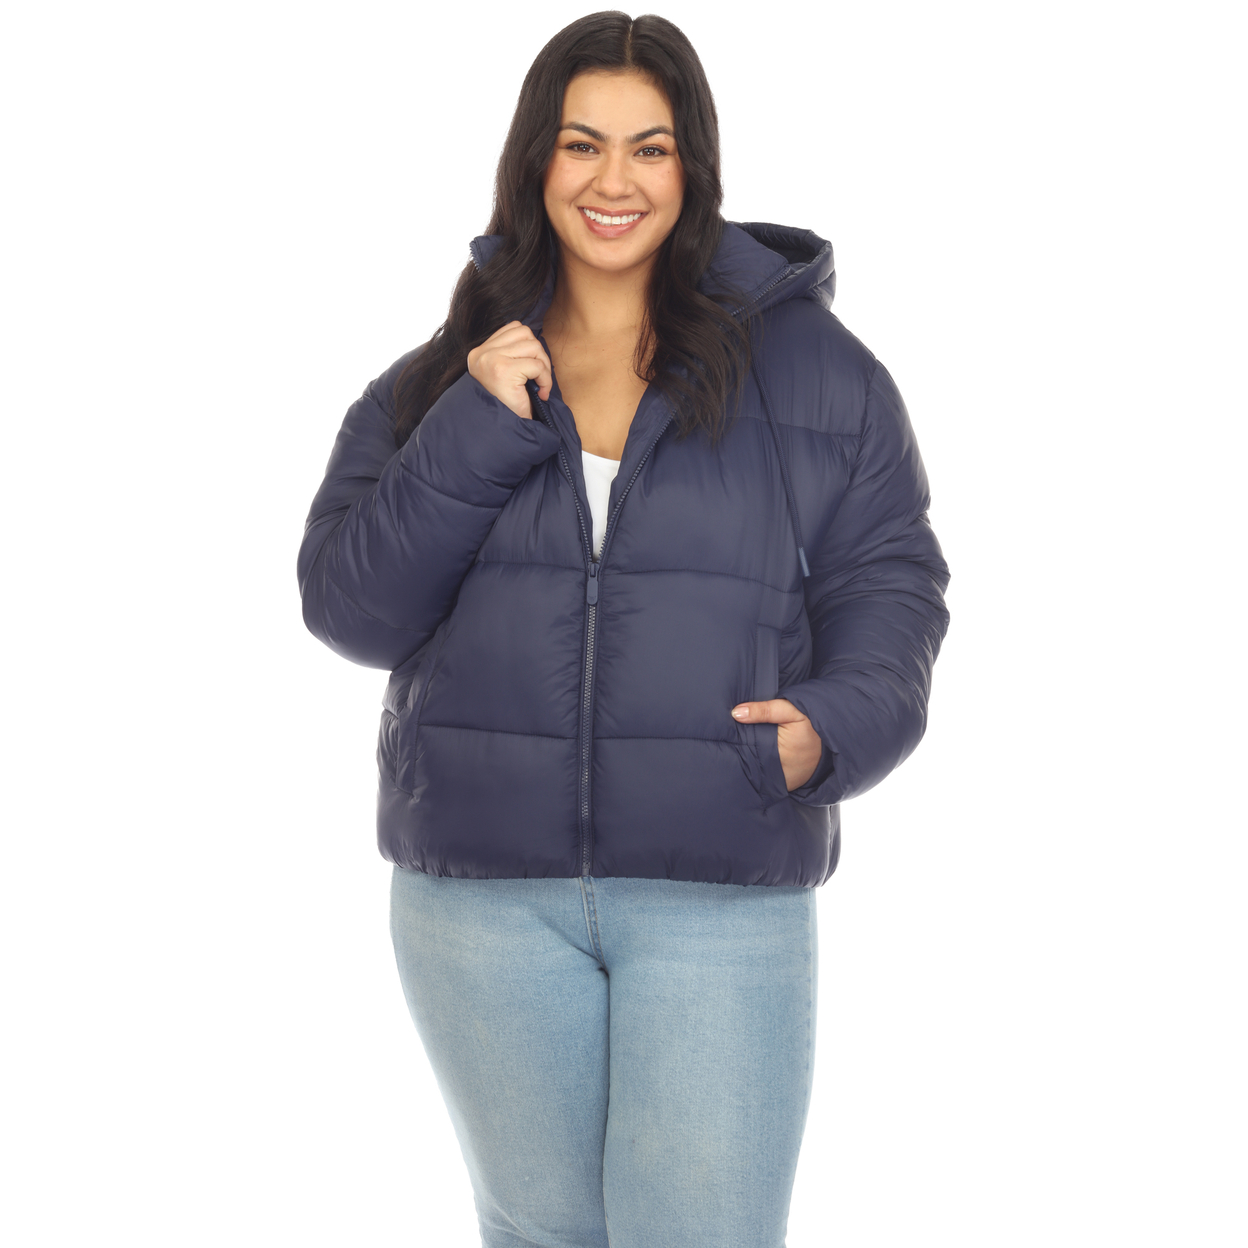 White Mark Women's Zip Hooded Puffer Jacket With Pockets - Blue, 1x